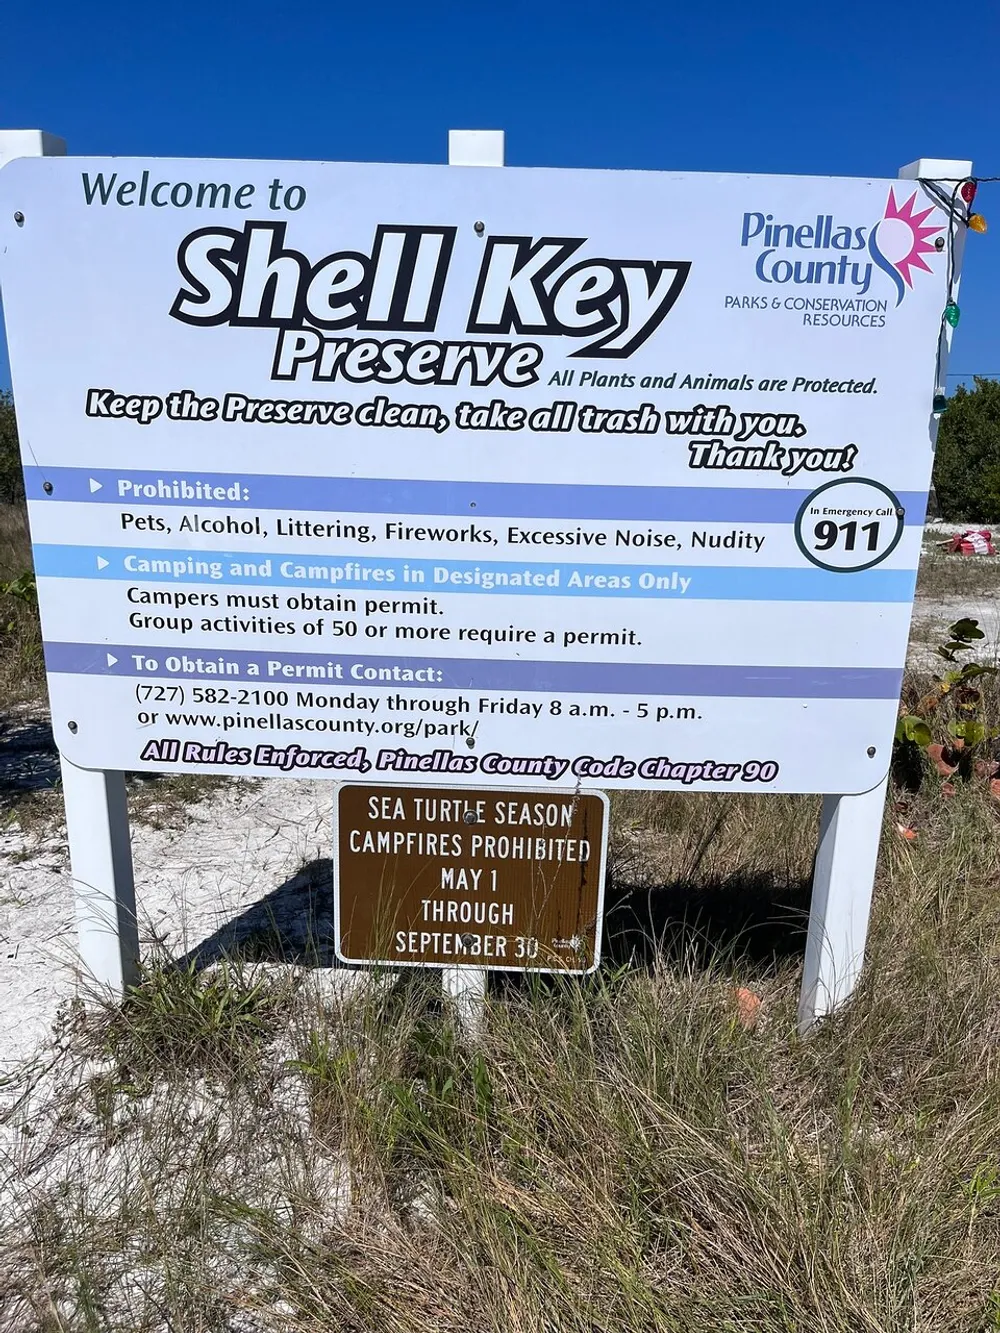 The image shows a welcome sign for Shell Key Preserve in Pinellas County highlighting preservation rules and contact information including a note on sea turtle season when campfires are prohibited